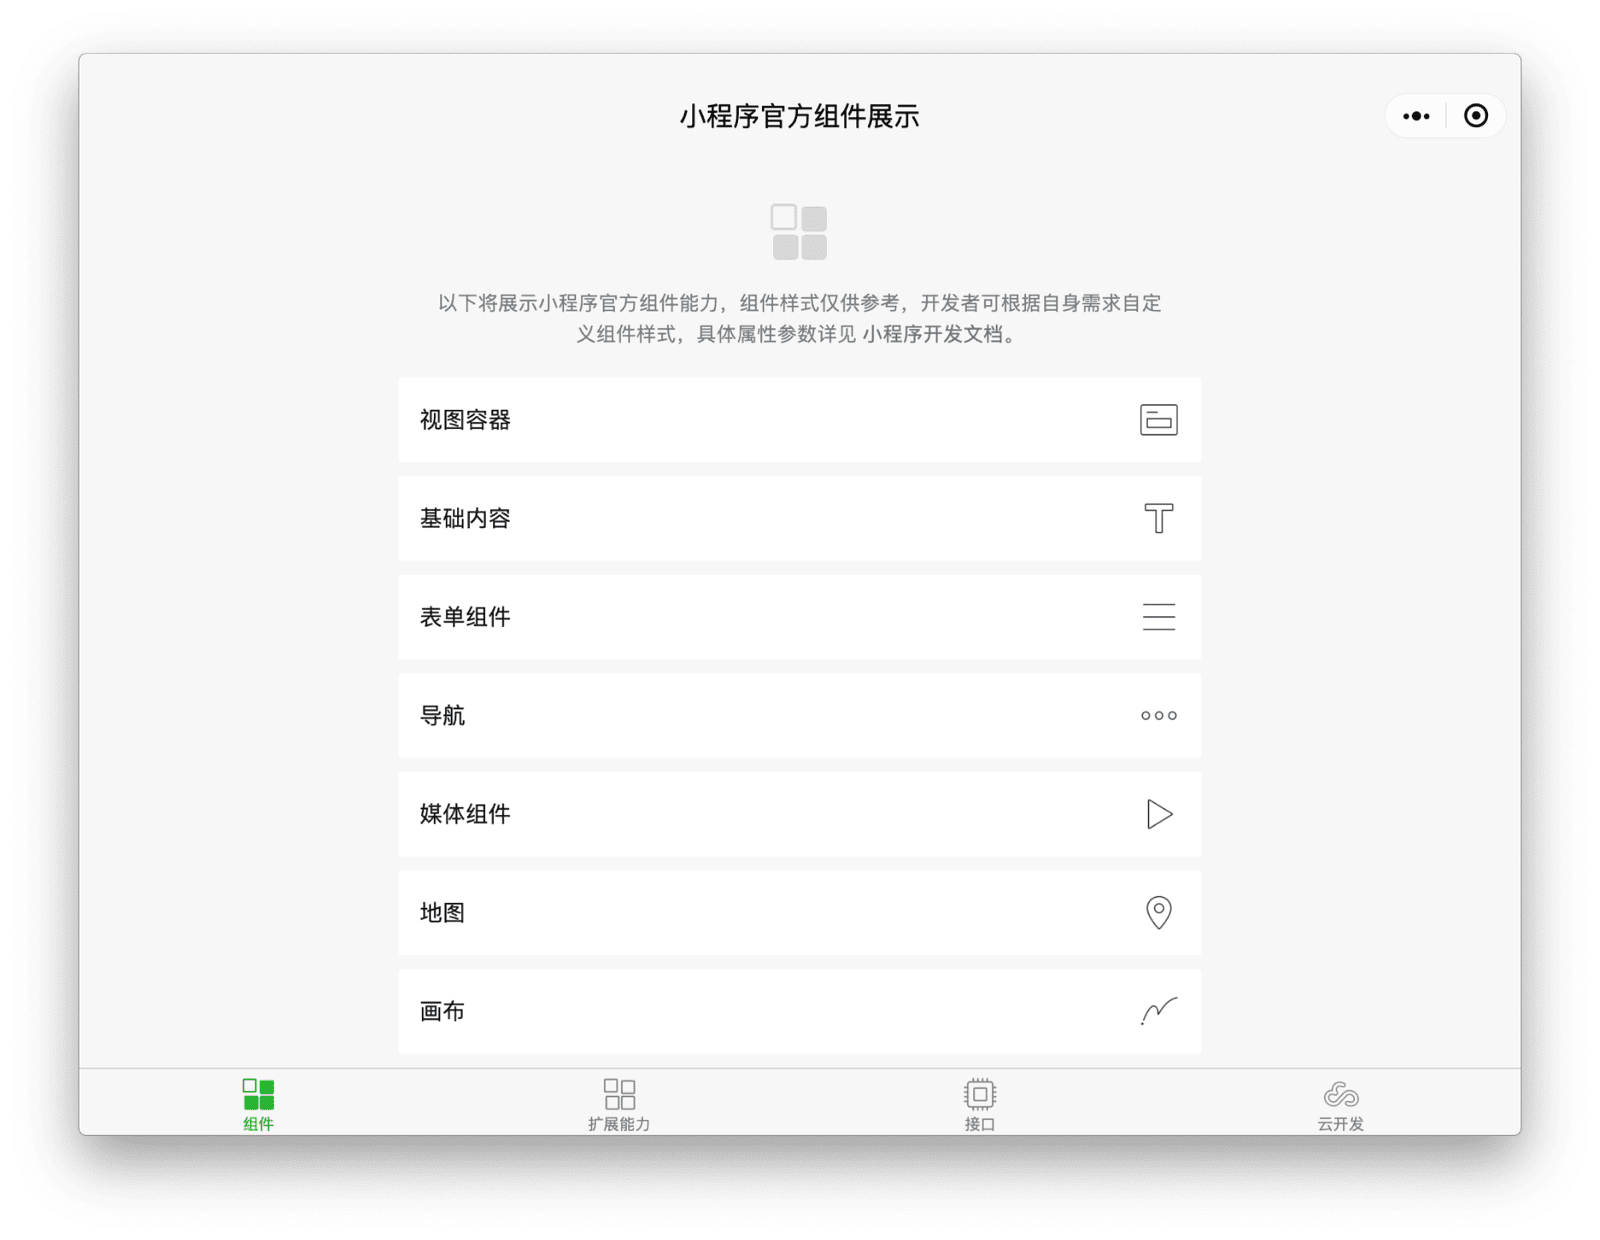 The WeChat components demo app in a responsive app window that can be resized and that by default is wider than the usual mobile screen.